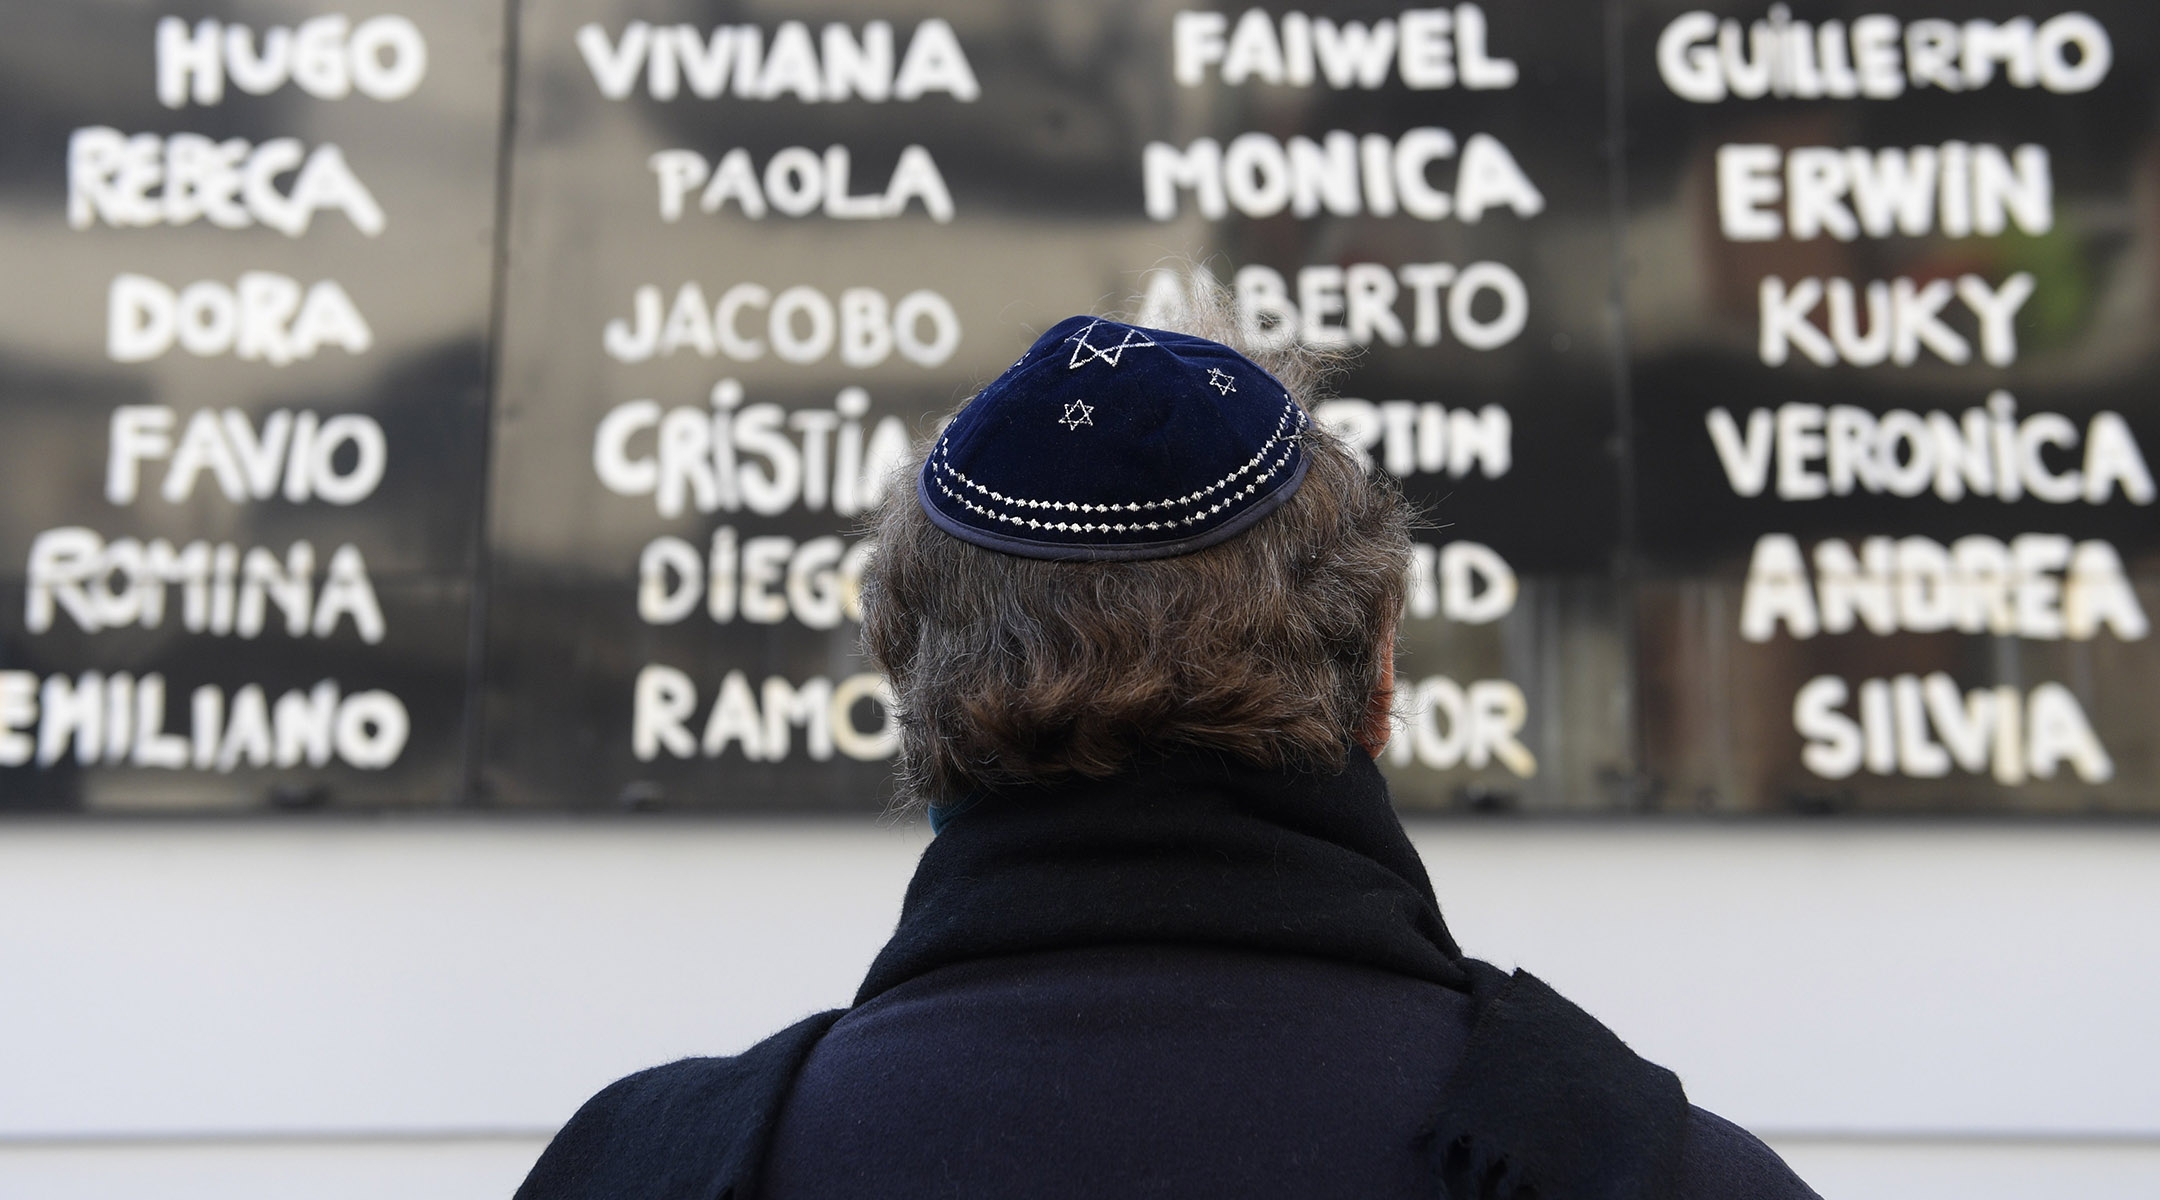 A man prays in front of the AMIA Jewish center during the commemoration of the 23rd anniversary of the terrorist bombing in Buenos Aires, July 18, 2017. (AFP/Juan Mabromata / Getty Images)